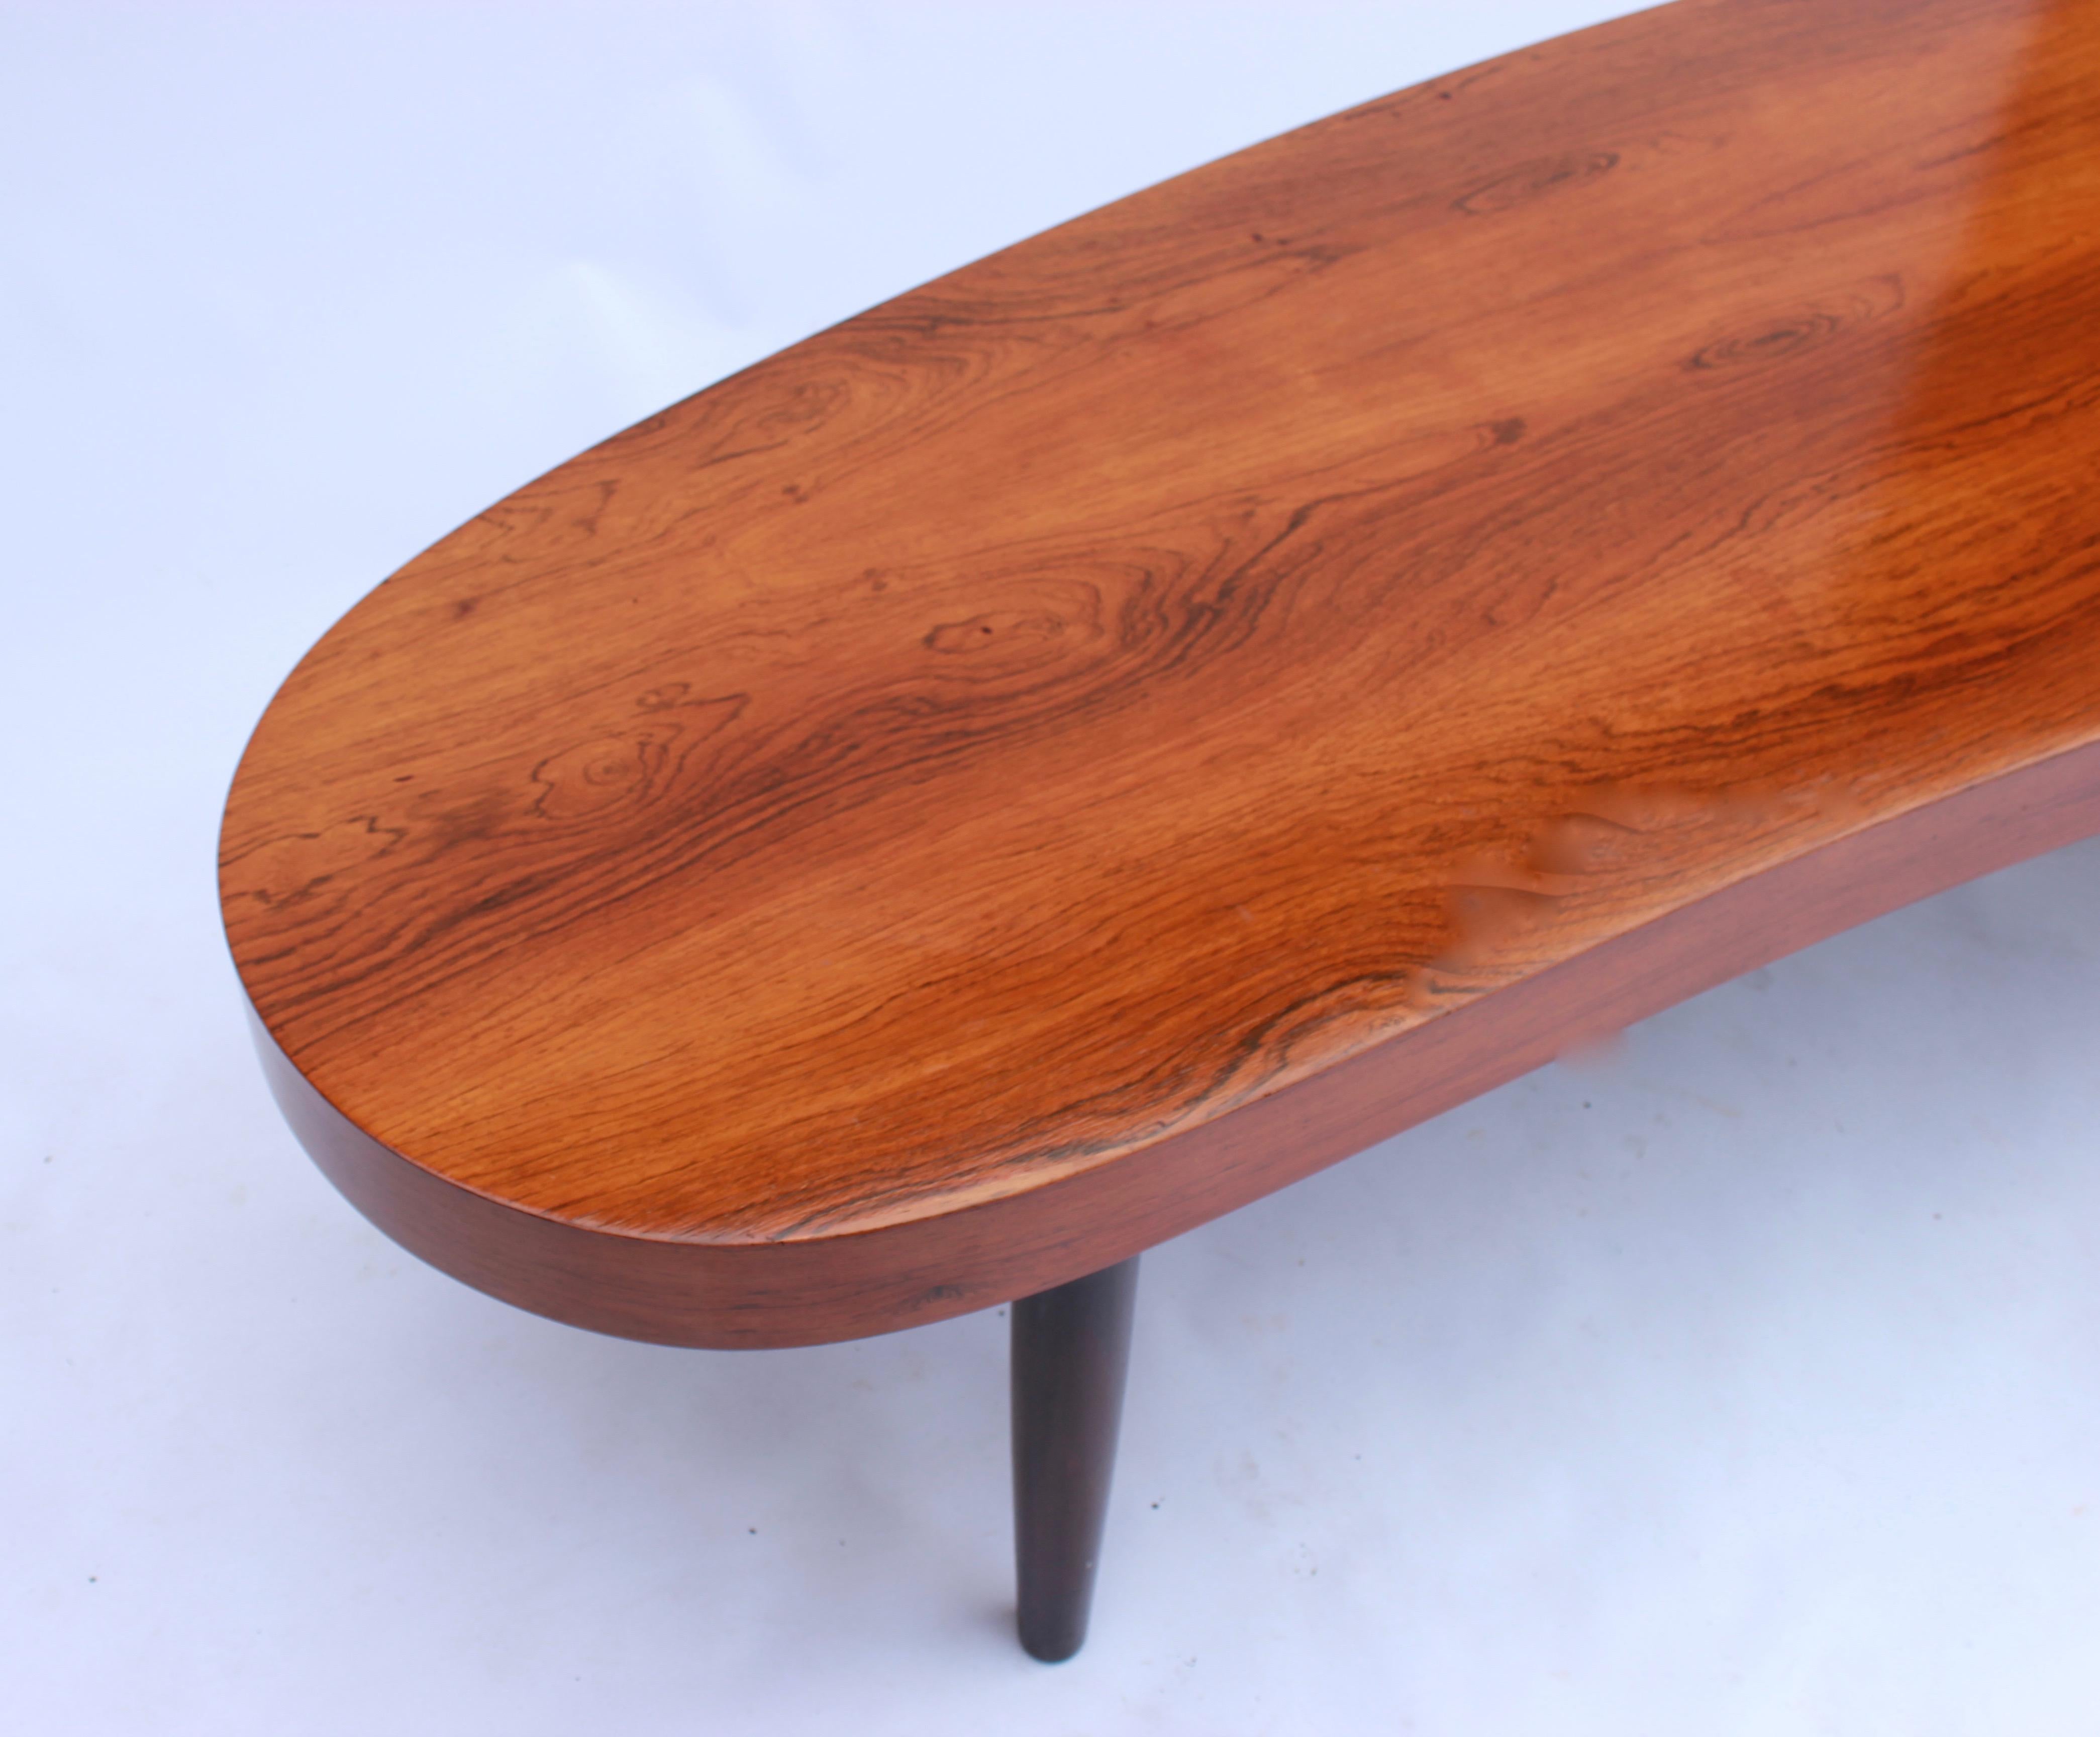 Scandinavian Modern Coffee Table in Rosewood of Danish Design and Danish Cabinetmaker from the 1960s